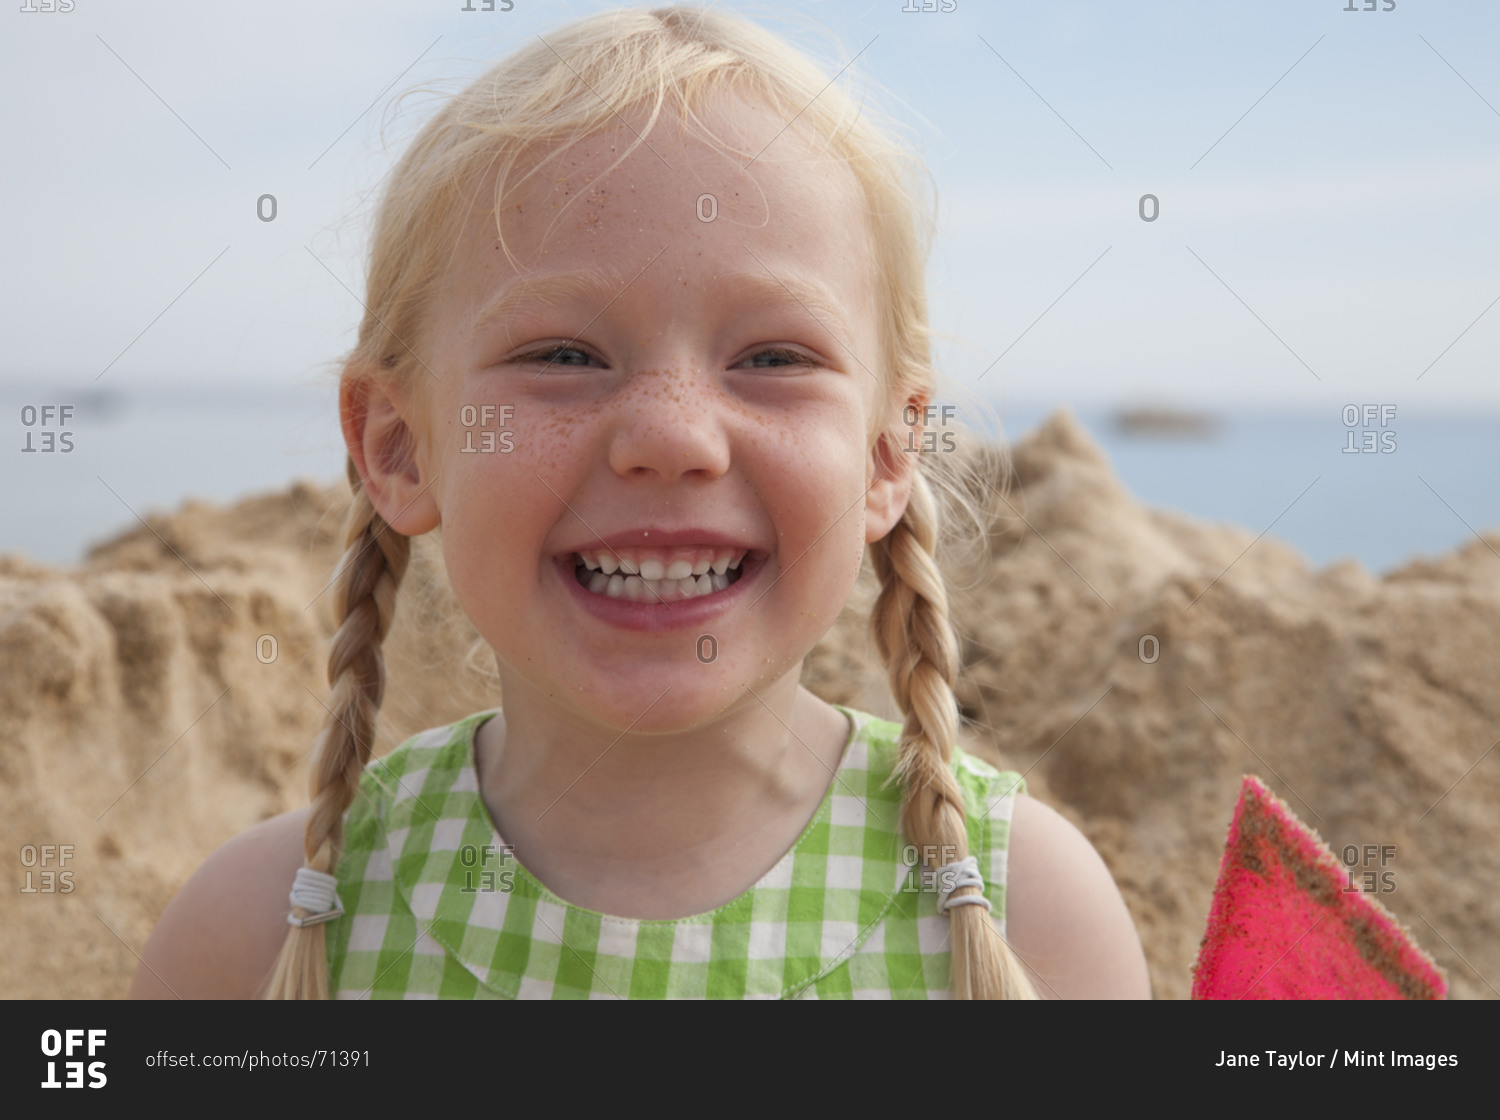 Young cheerful girl in front of huge pile of sand